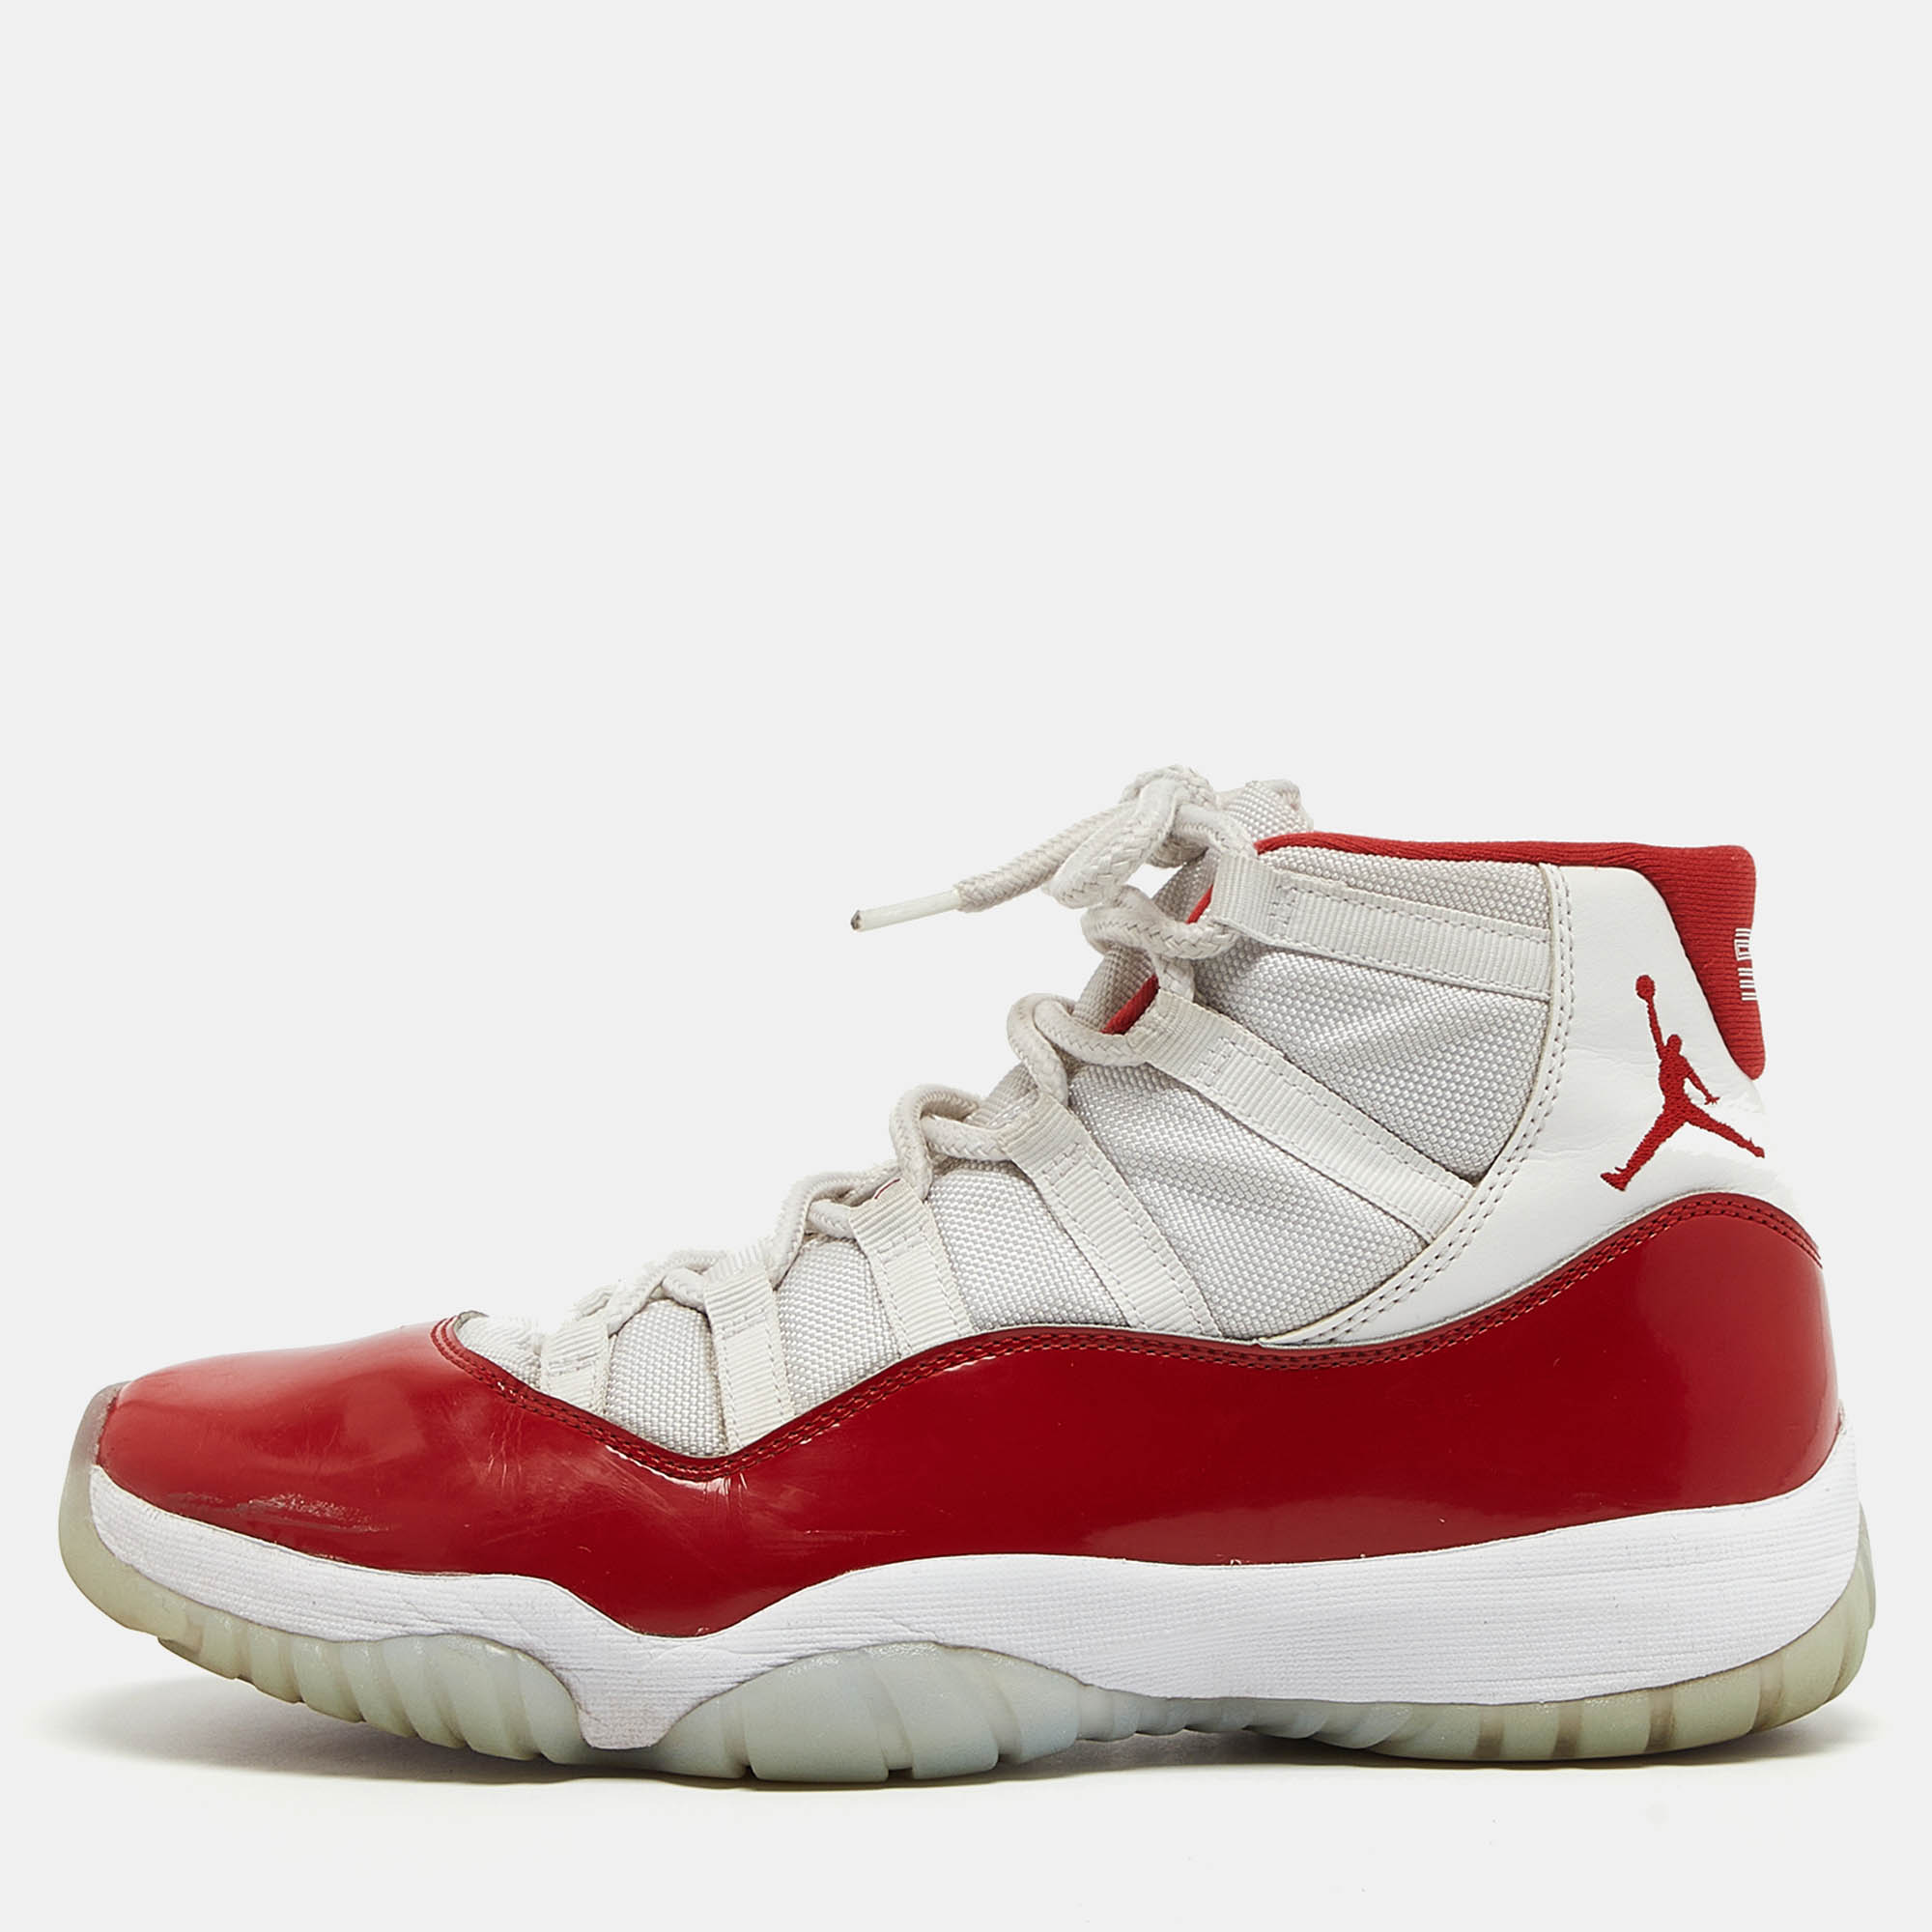 

Air Jordans White/Red Canvas And Leather Jordan 11 Retro High Sneakers Size